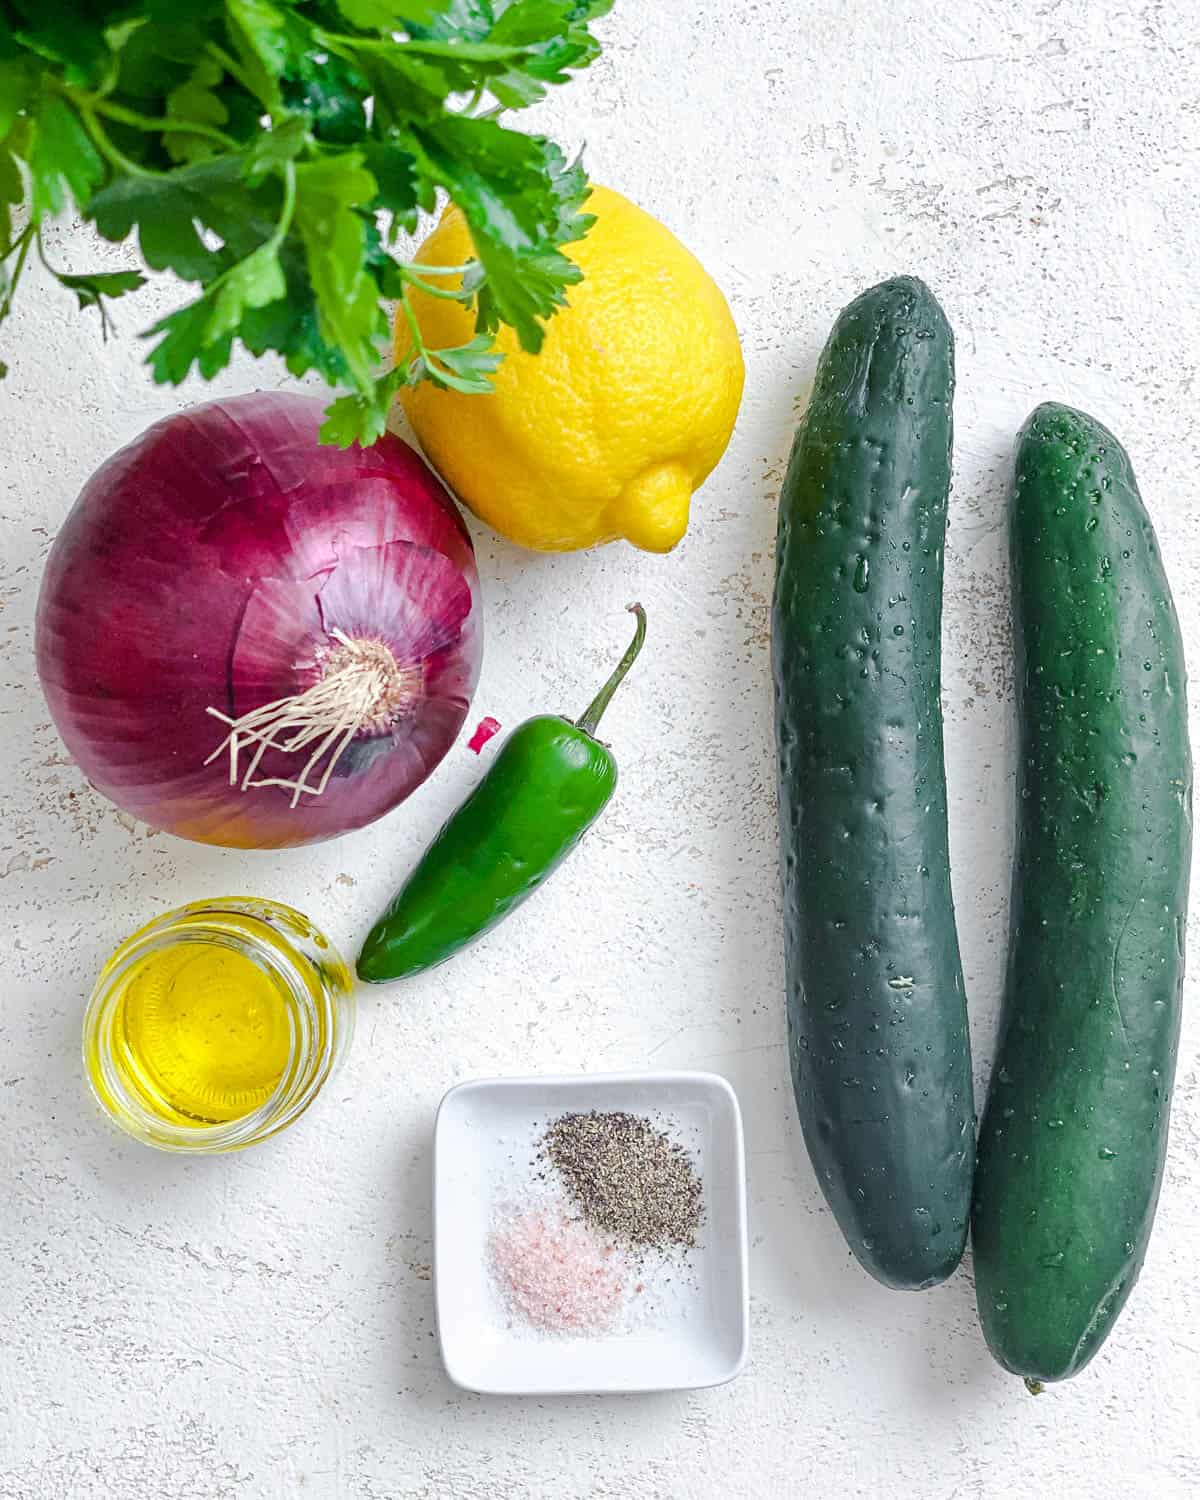 ingredients for Cucumber Salsa [Cucumber Pico de Gallo] measured out against a white surface